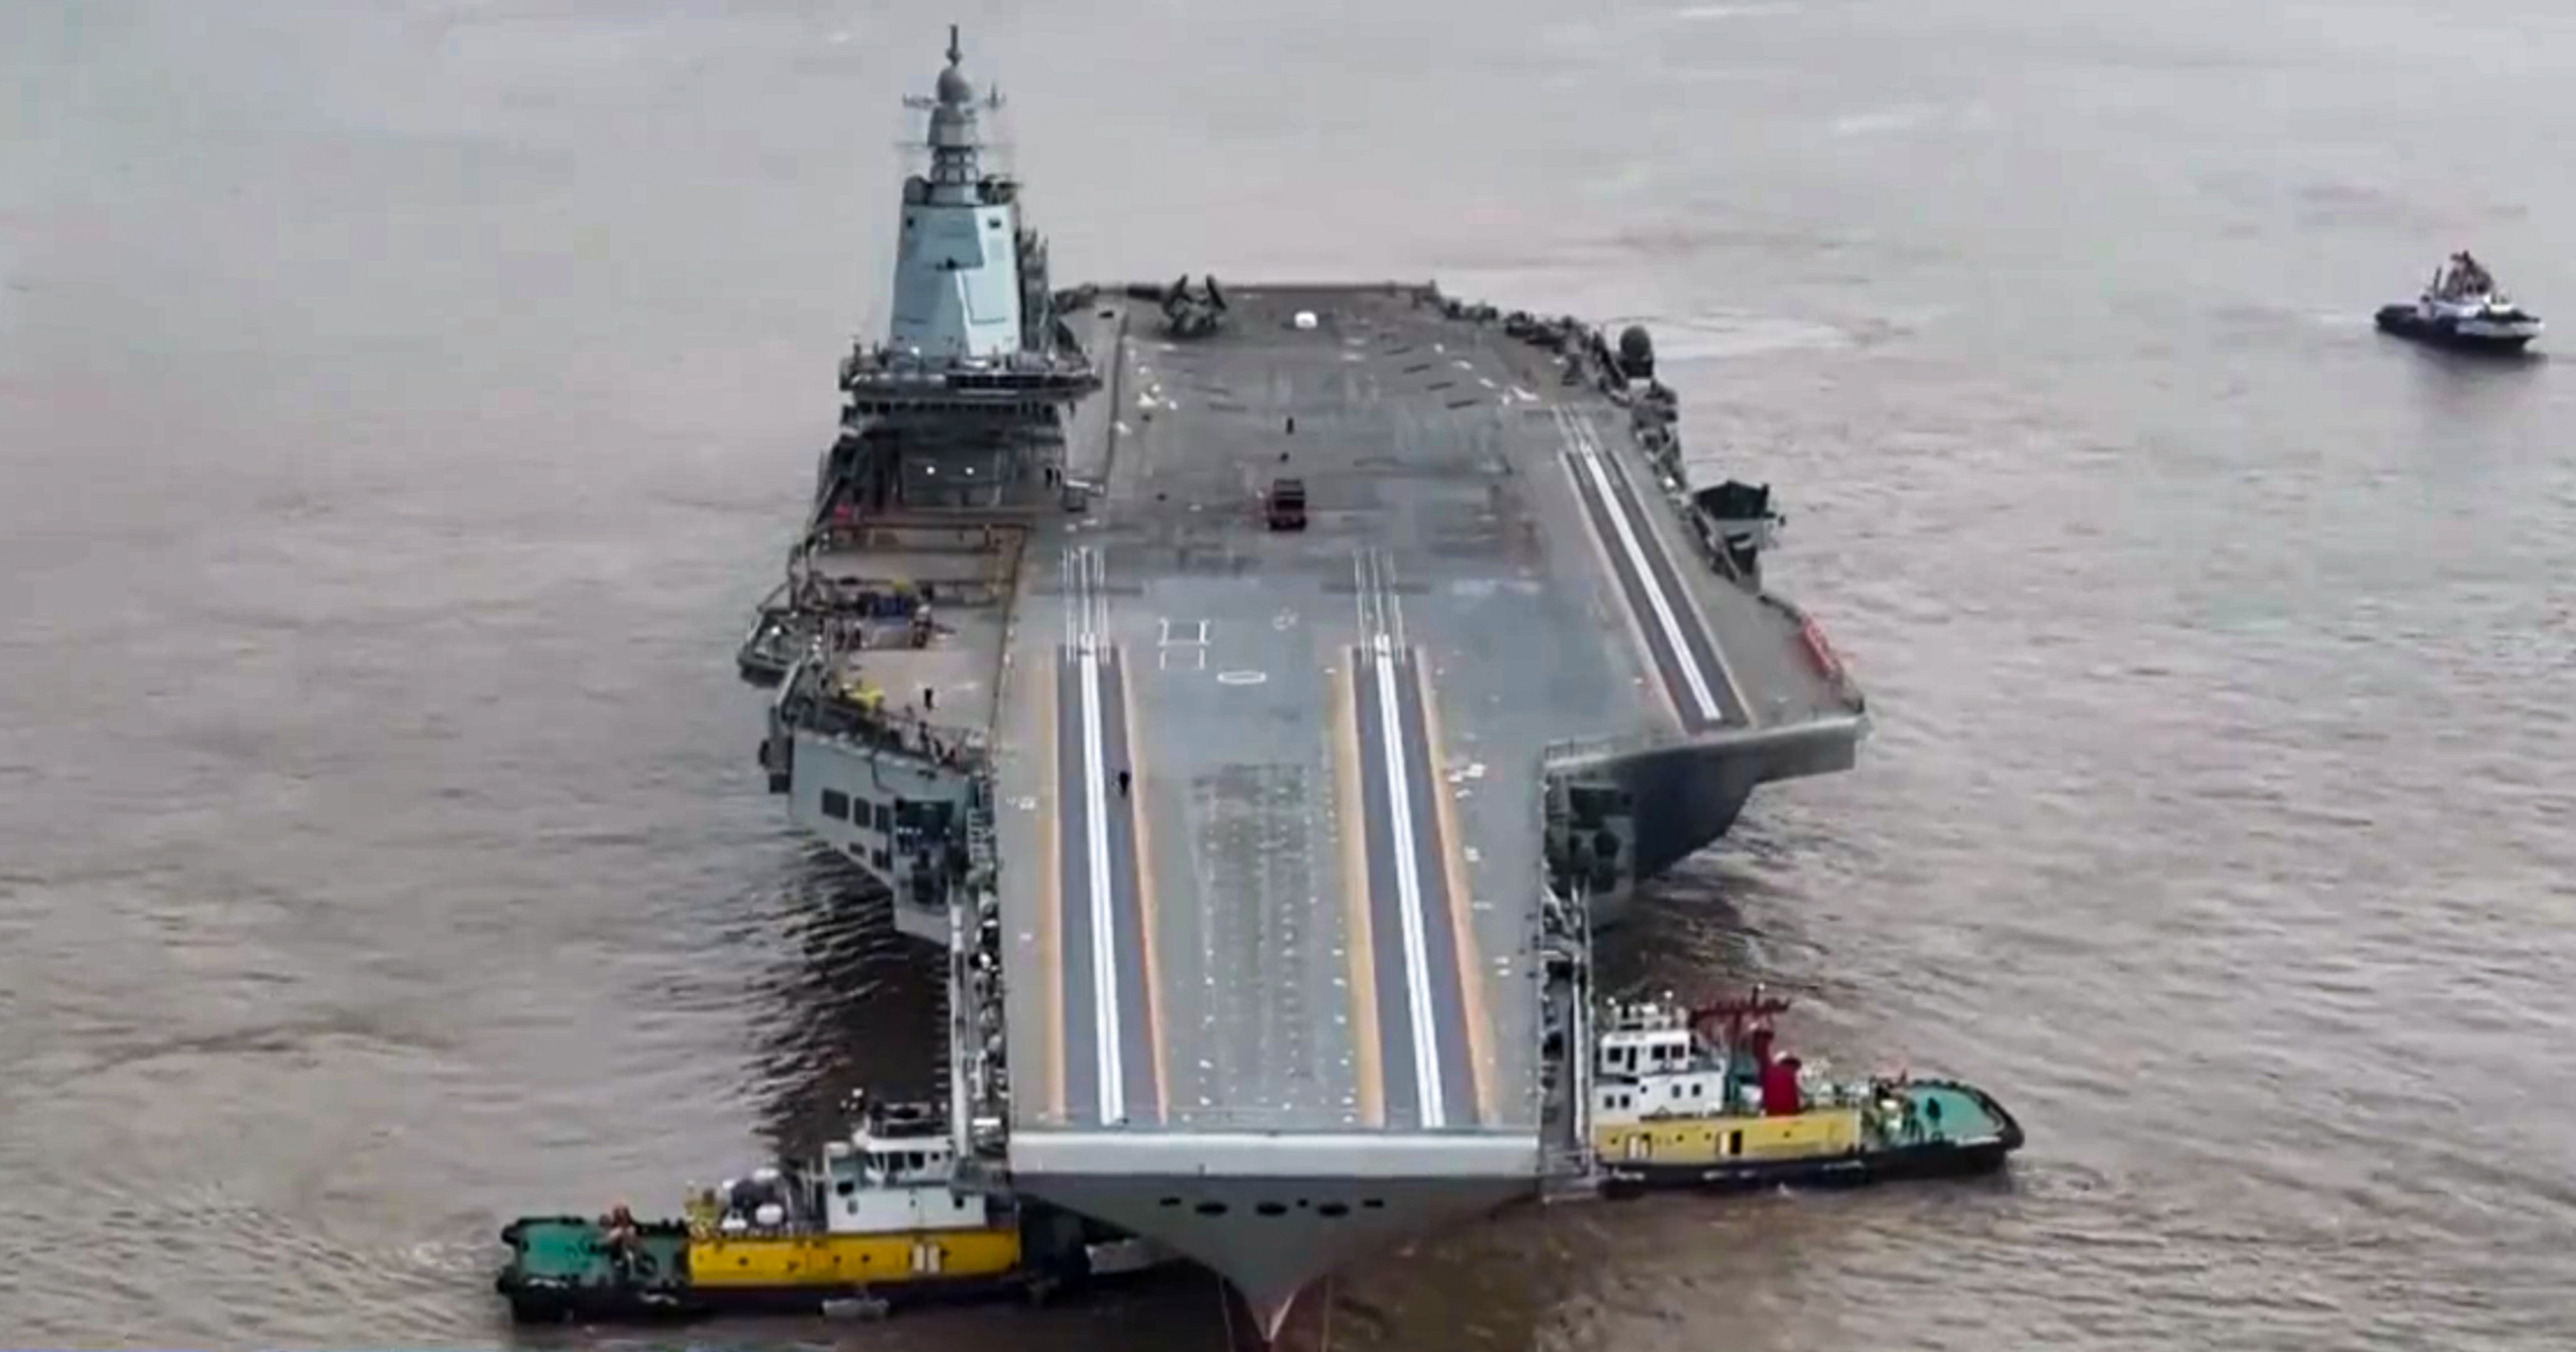 The Fujian was shown being towed by tugboats in a report on state television on January 2. Photo: CCTV